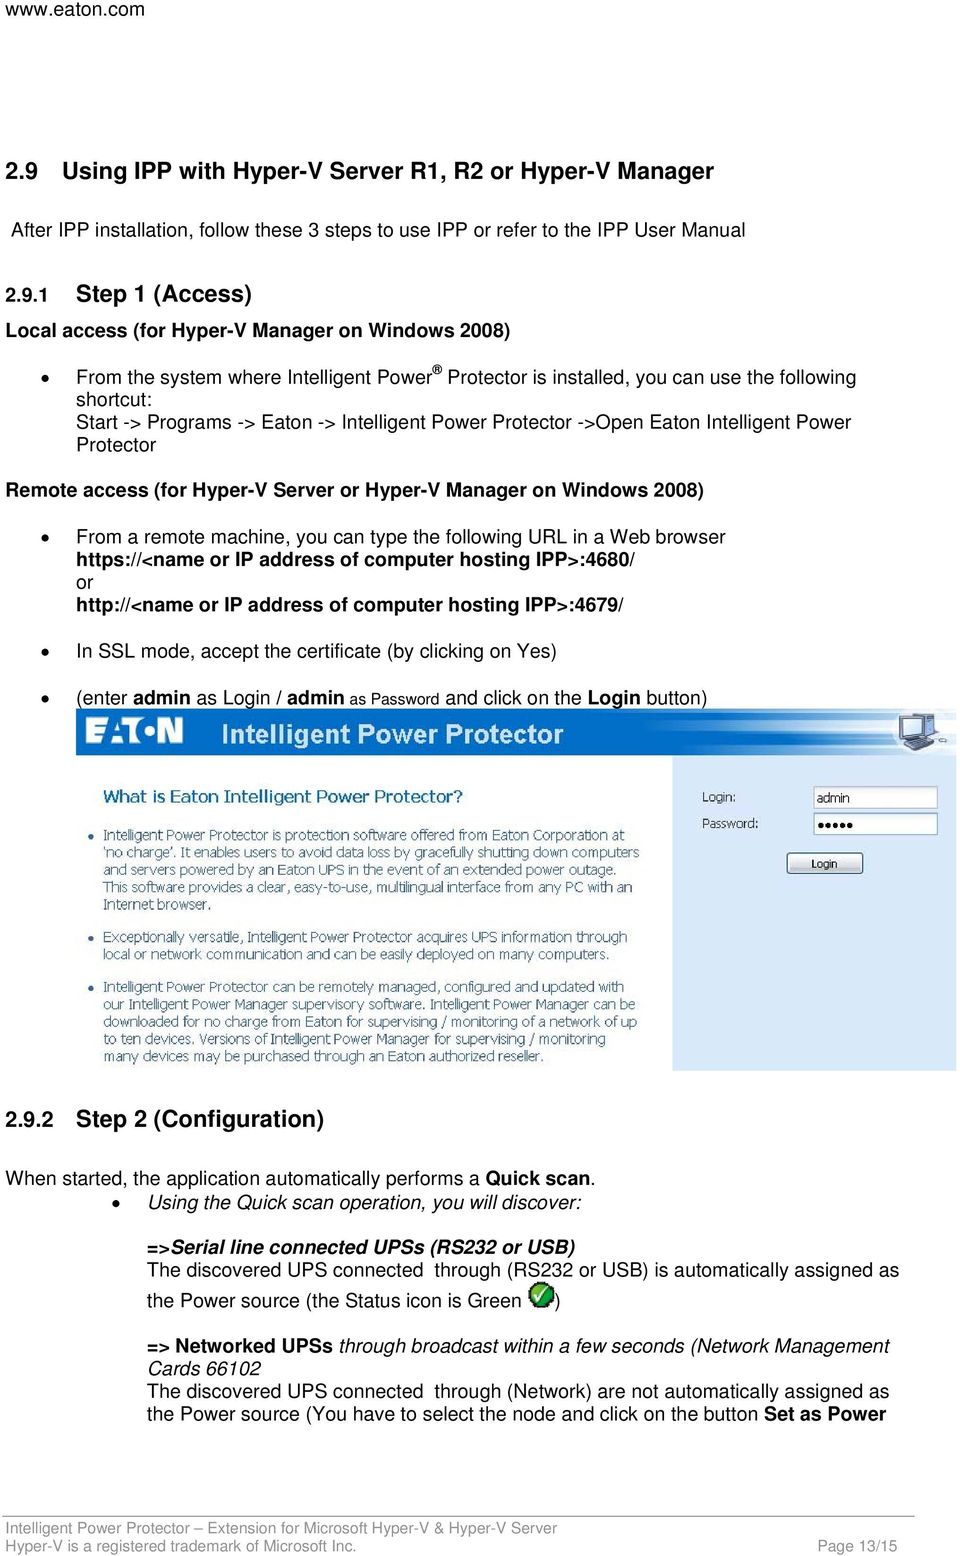 Intelligent Power Protector Remote access (for Hyper-V Server or Hyper-V Manager on Windows 2008) From a remote machine, you can type the following URL in a Web browser https://<name or IP address of